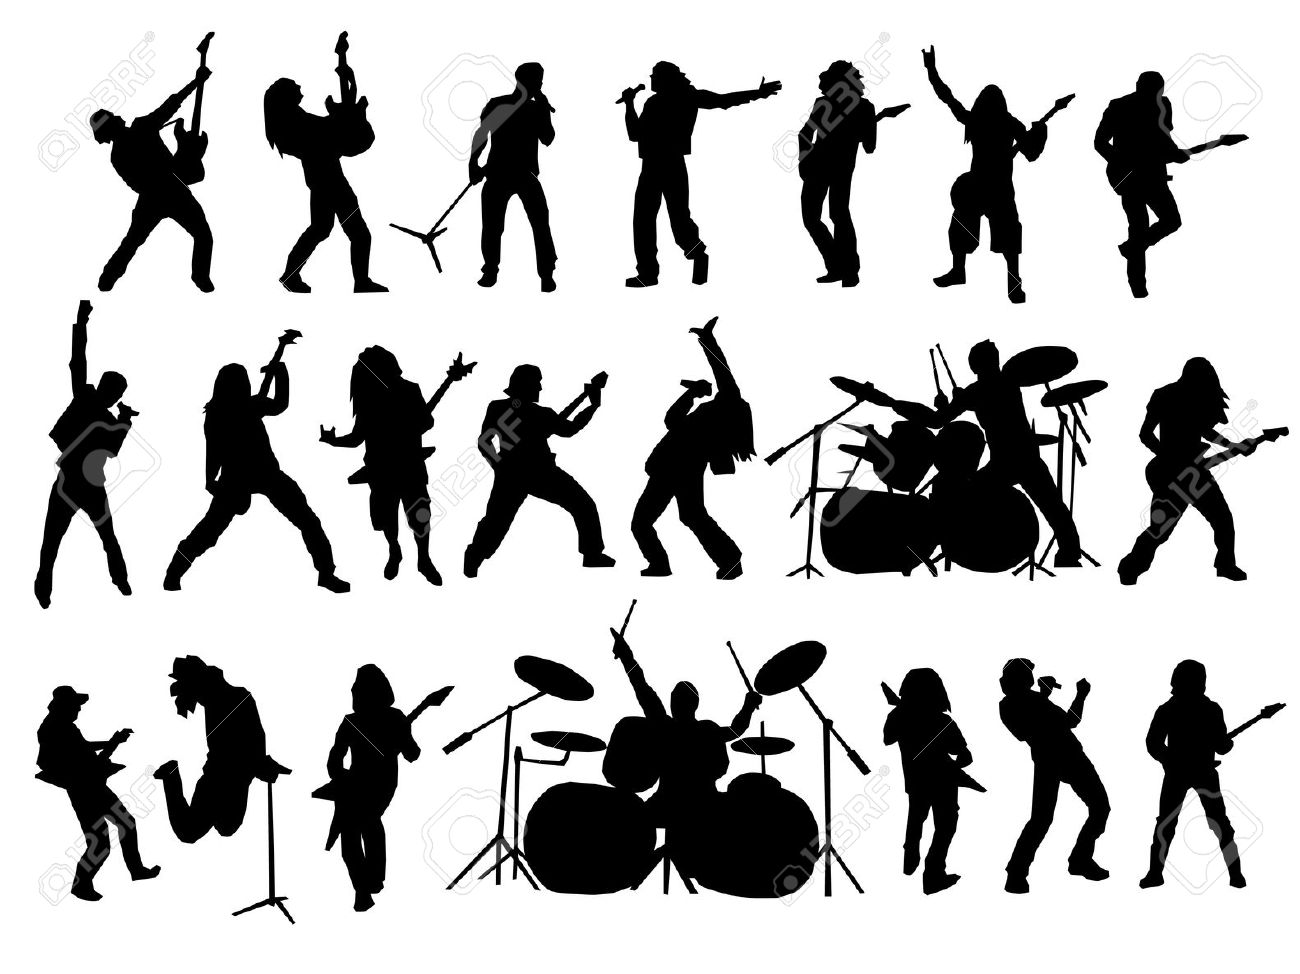 Rock band silhouette clipart 